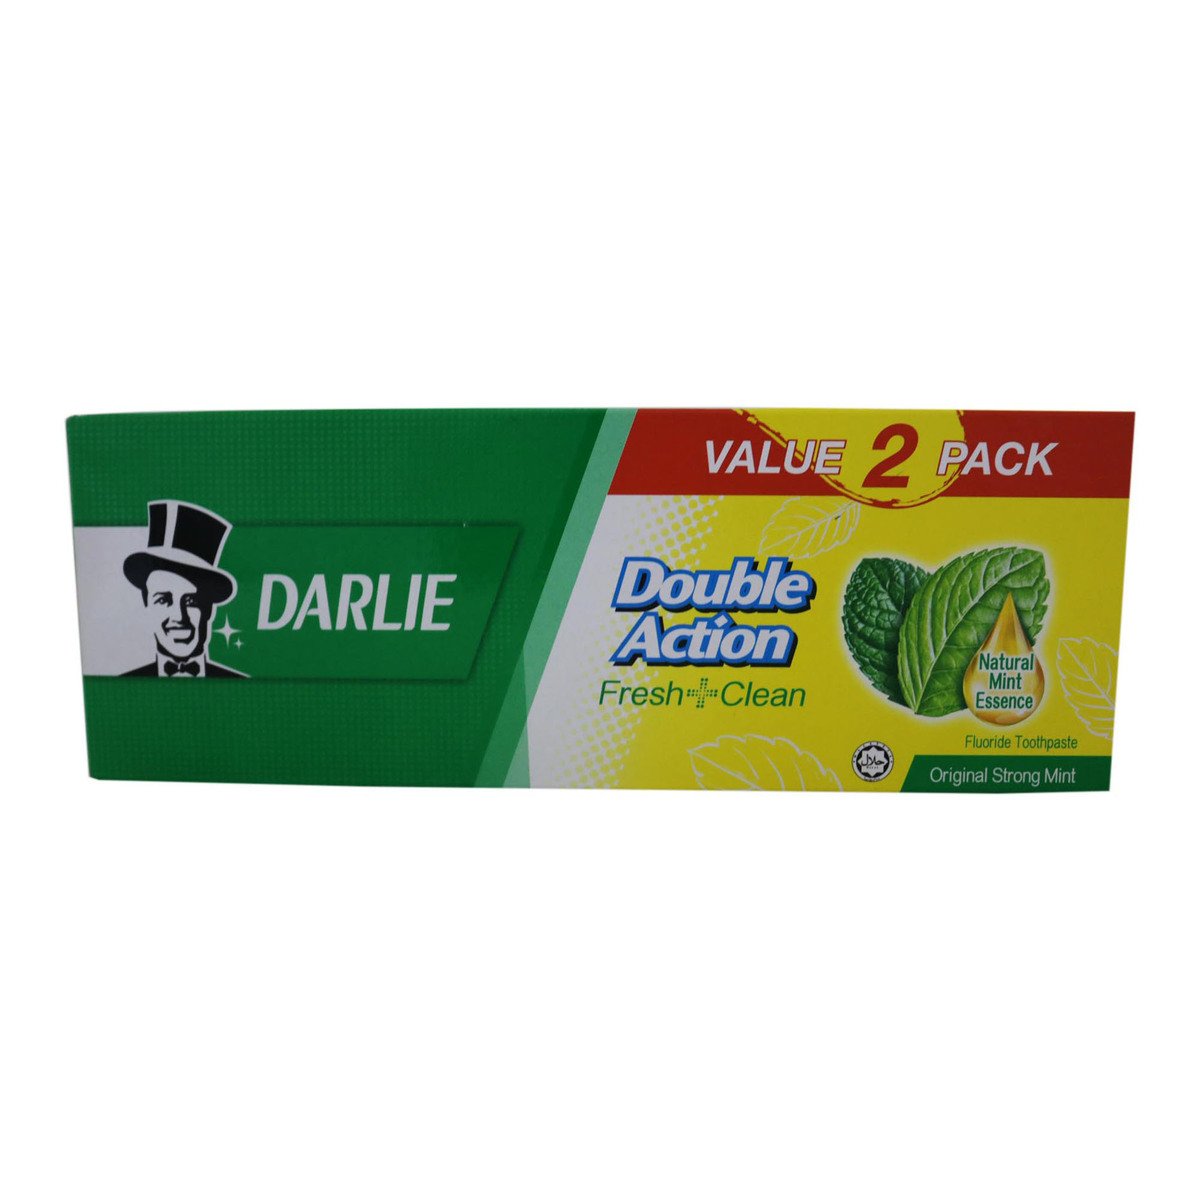 Darlie Tooth Paste Double Action 2 x 225g